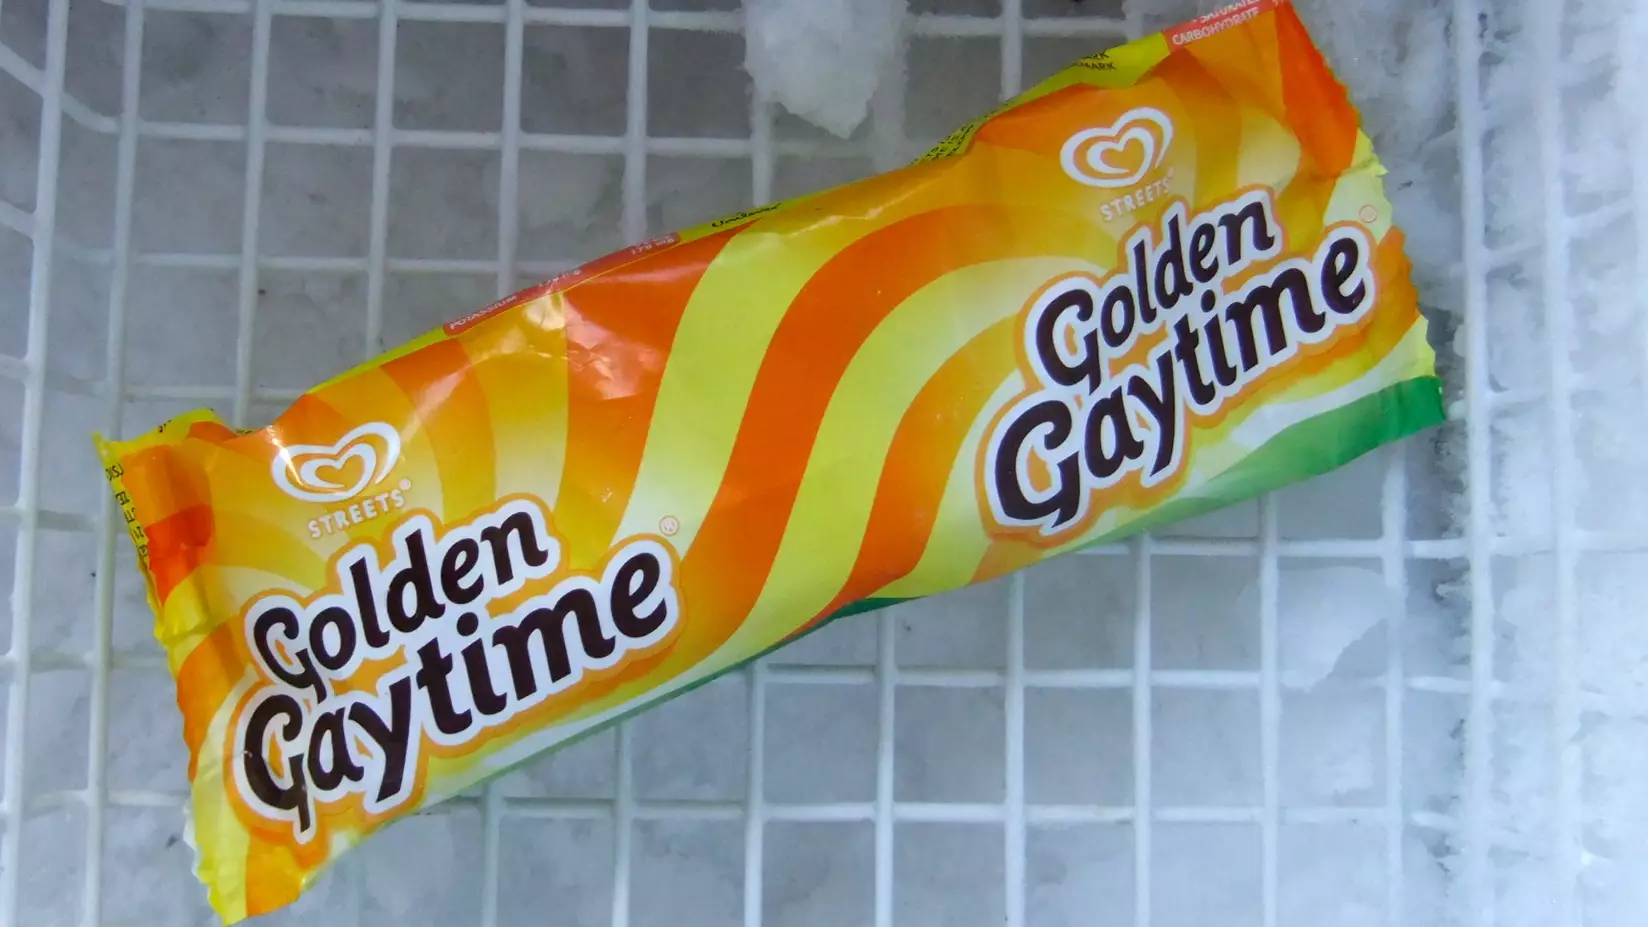 Gay Aussies Hit Back Against Petition To Rename Golden Gaytimes